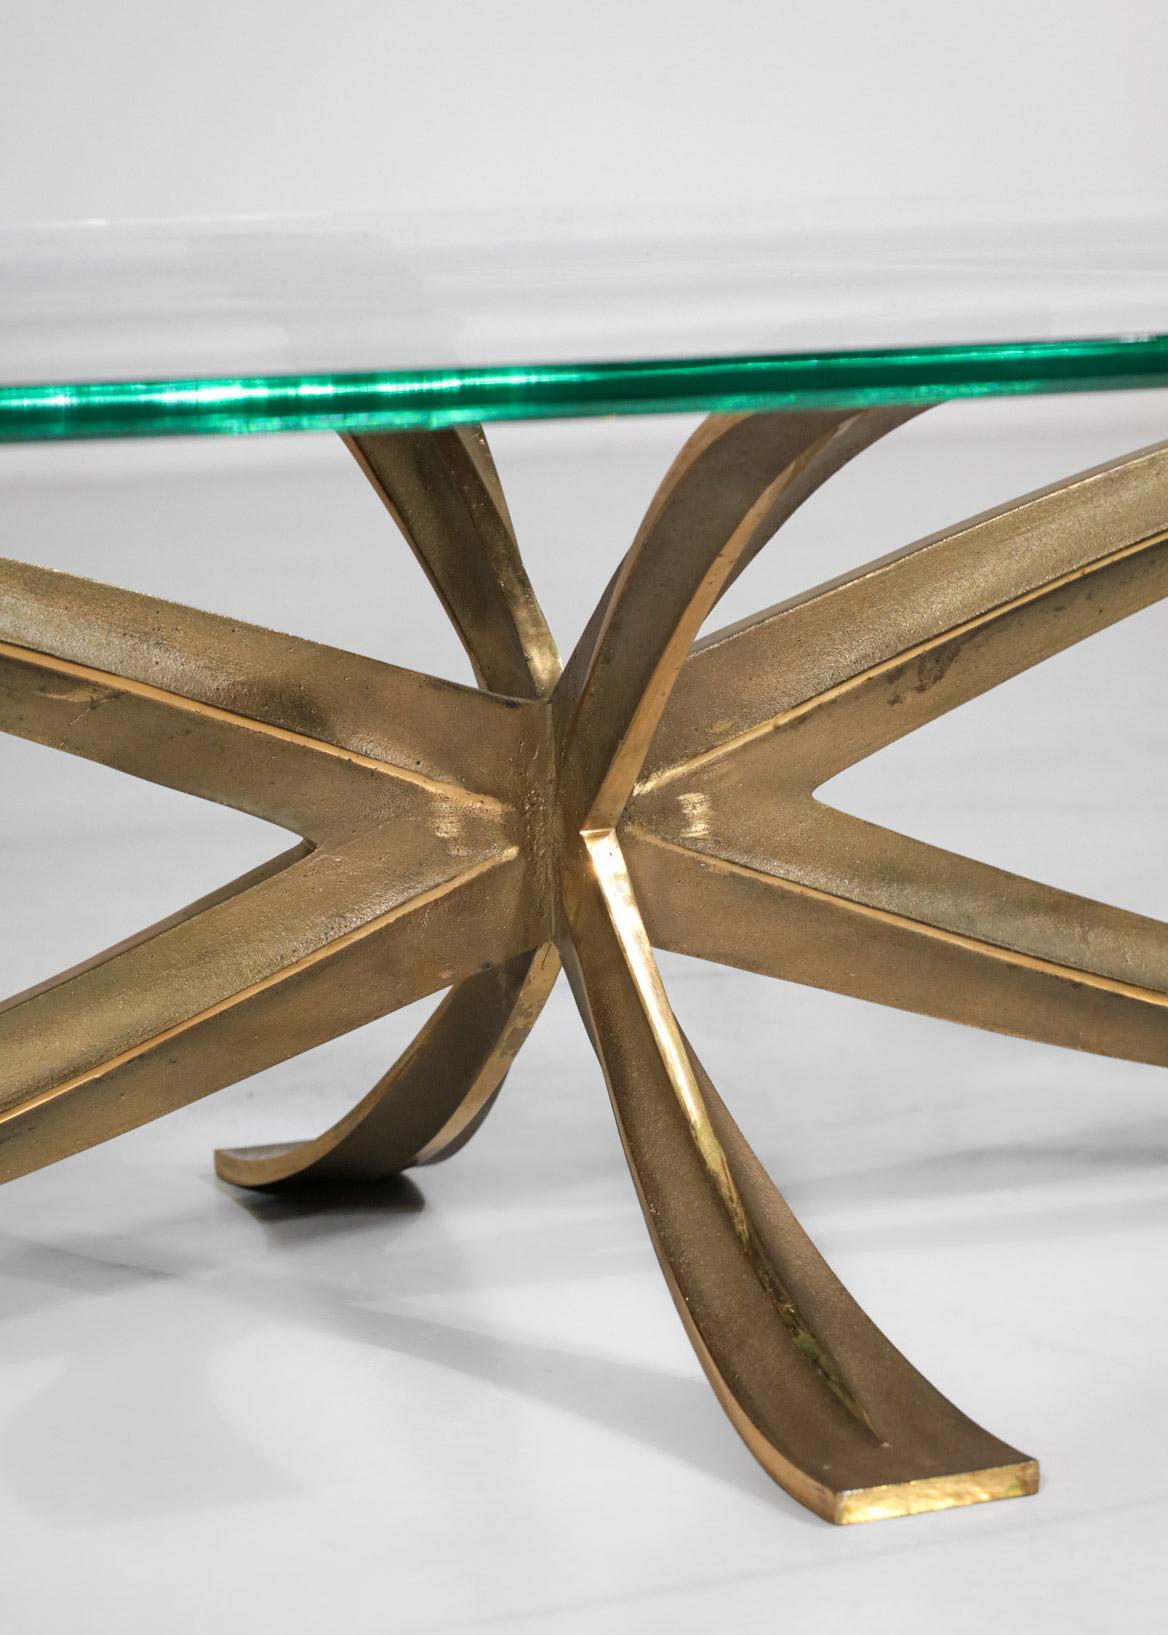 French Large Michel Mangematin Coffee Table in Gilt Bronze and Oval Glass 1960's Design For Sale